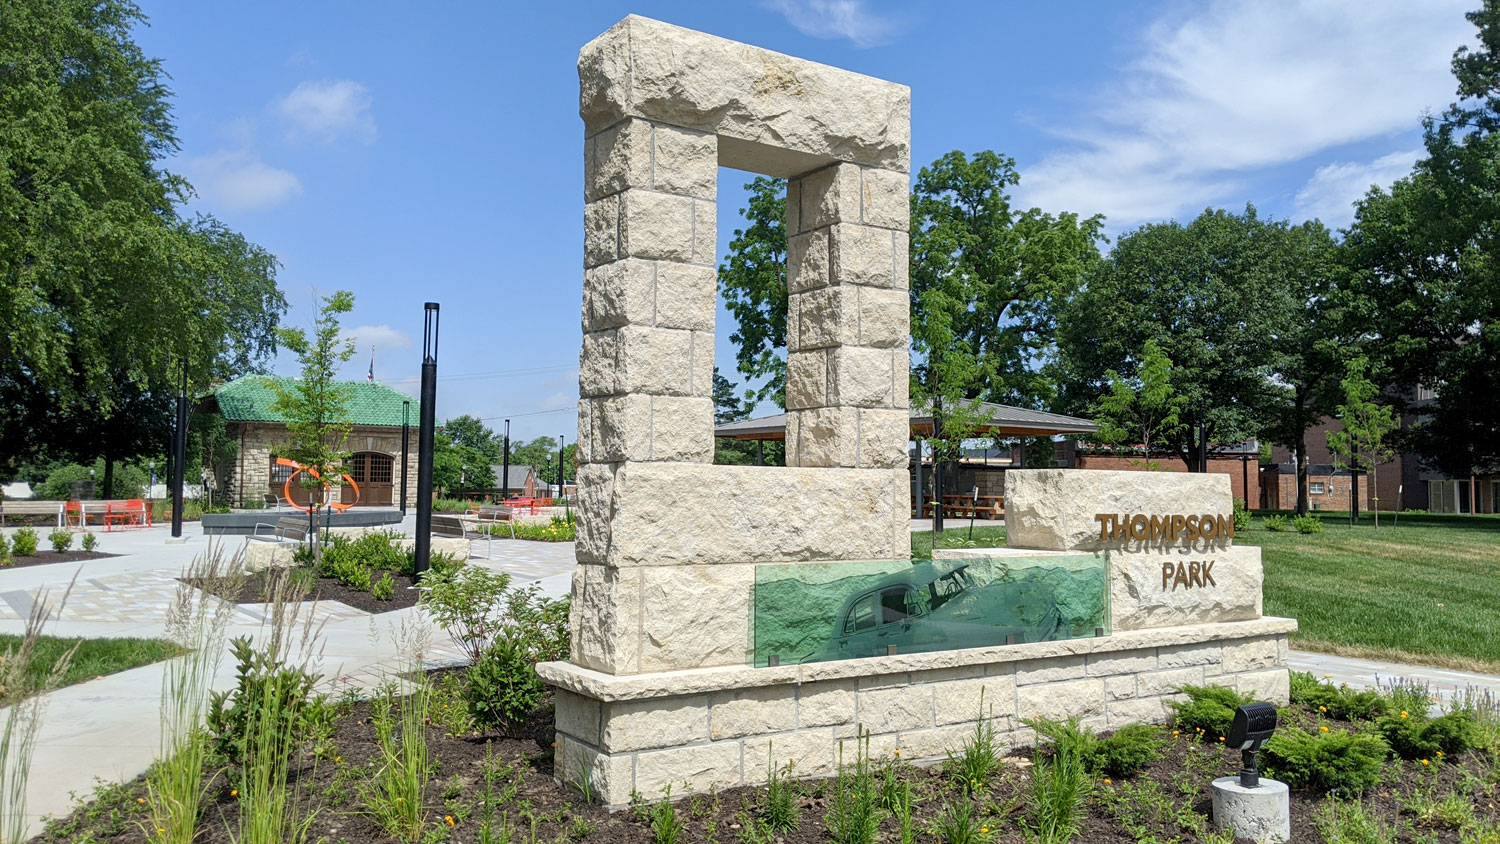 This is an image of downtown overland park thompson park east entrance sign plaza web